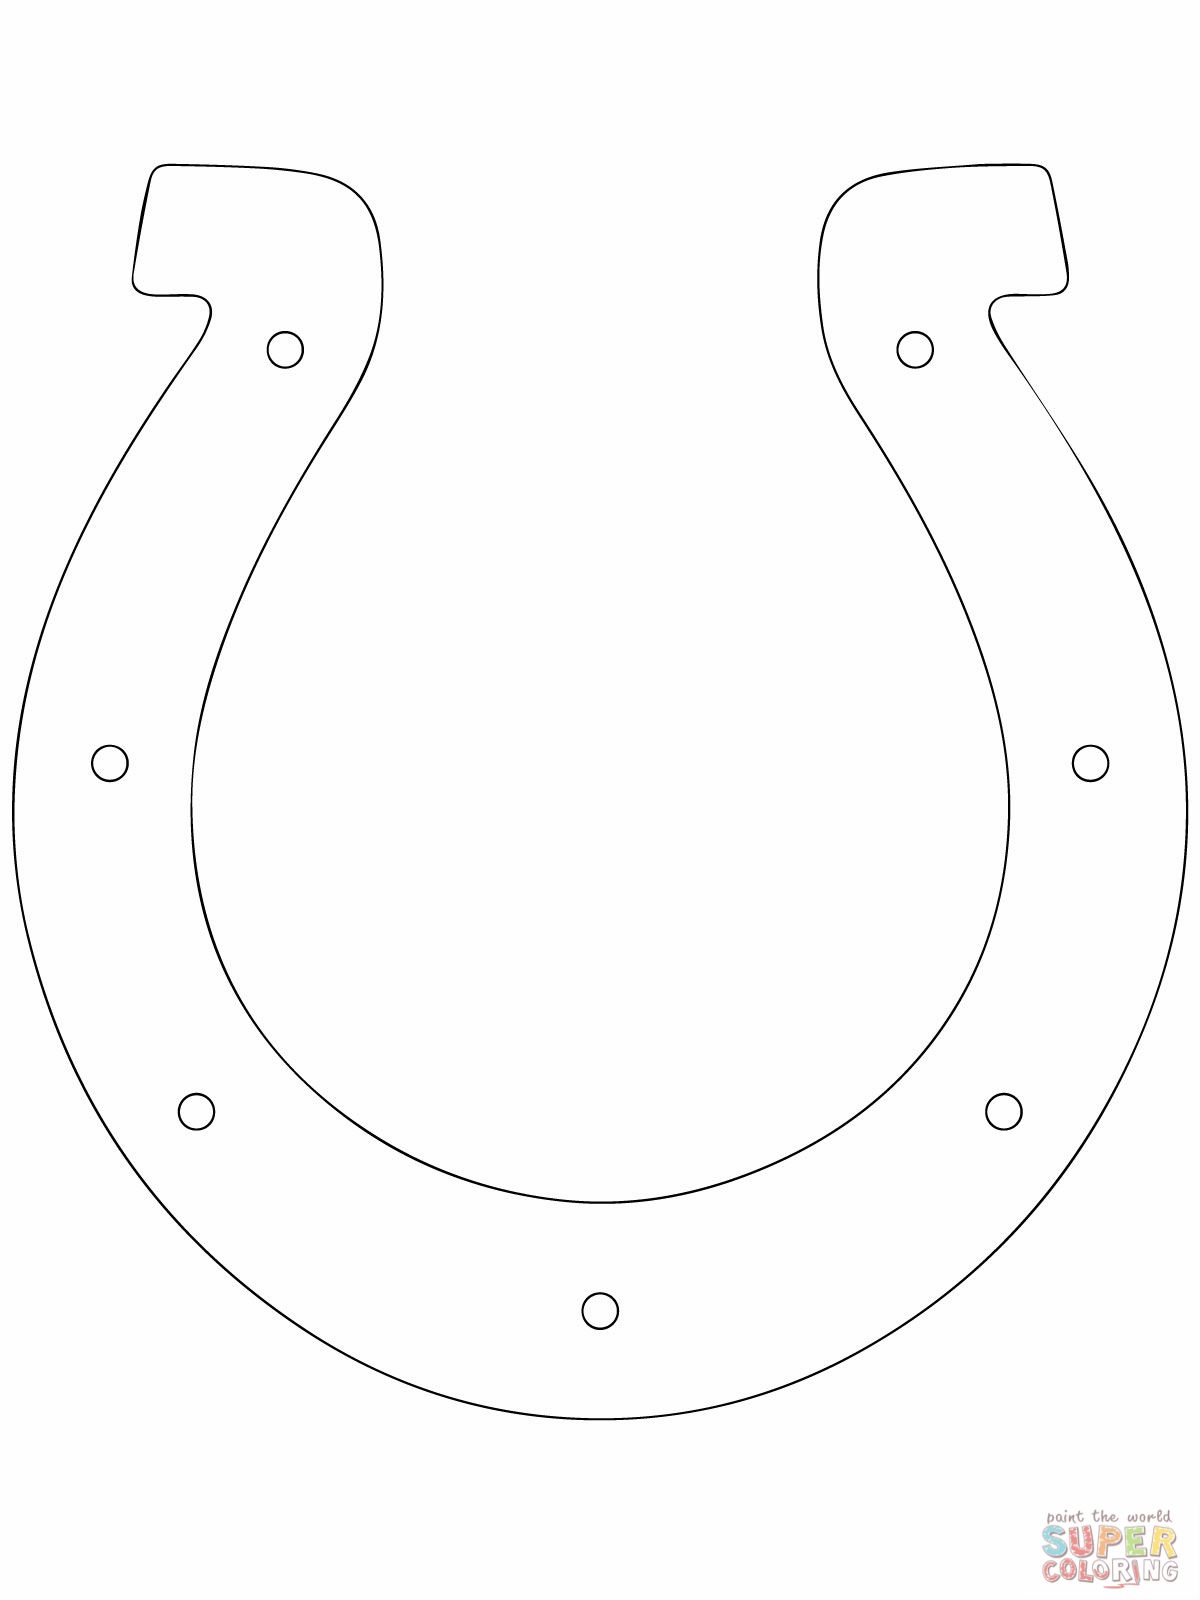 Horseshoe Coloring Page at Free printable colorings